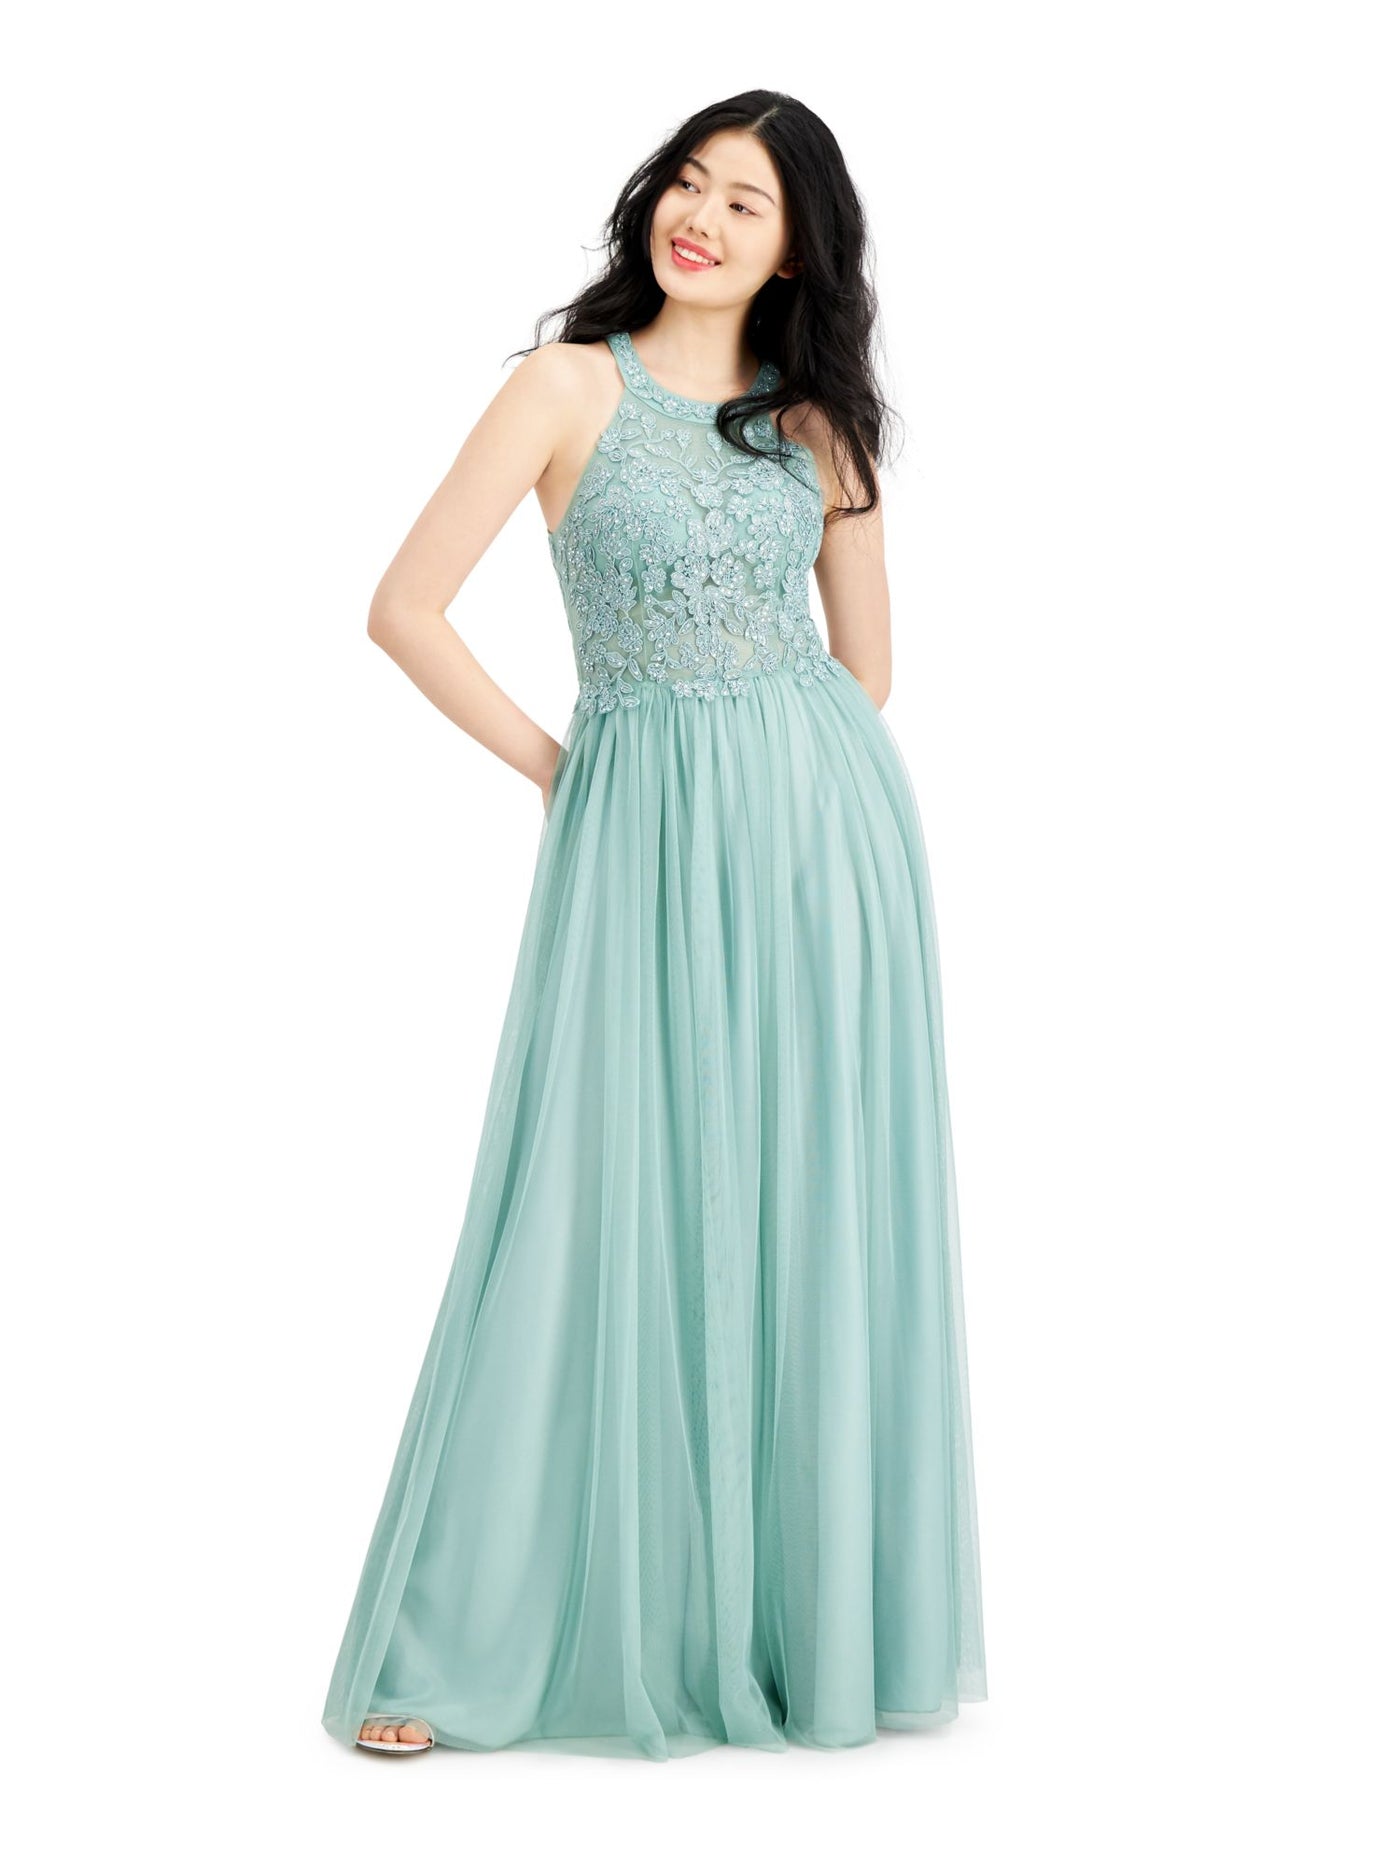 SPEECHLESS Womens Turquoise Embroidered Embellished Lace Gown Sleeveless Halter Full-Length Prom Dress Juniors 0